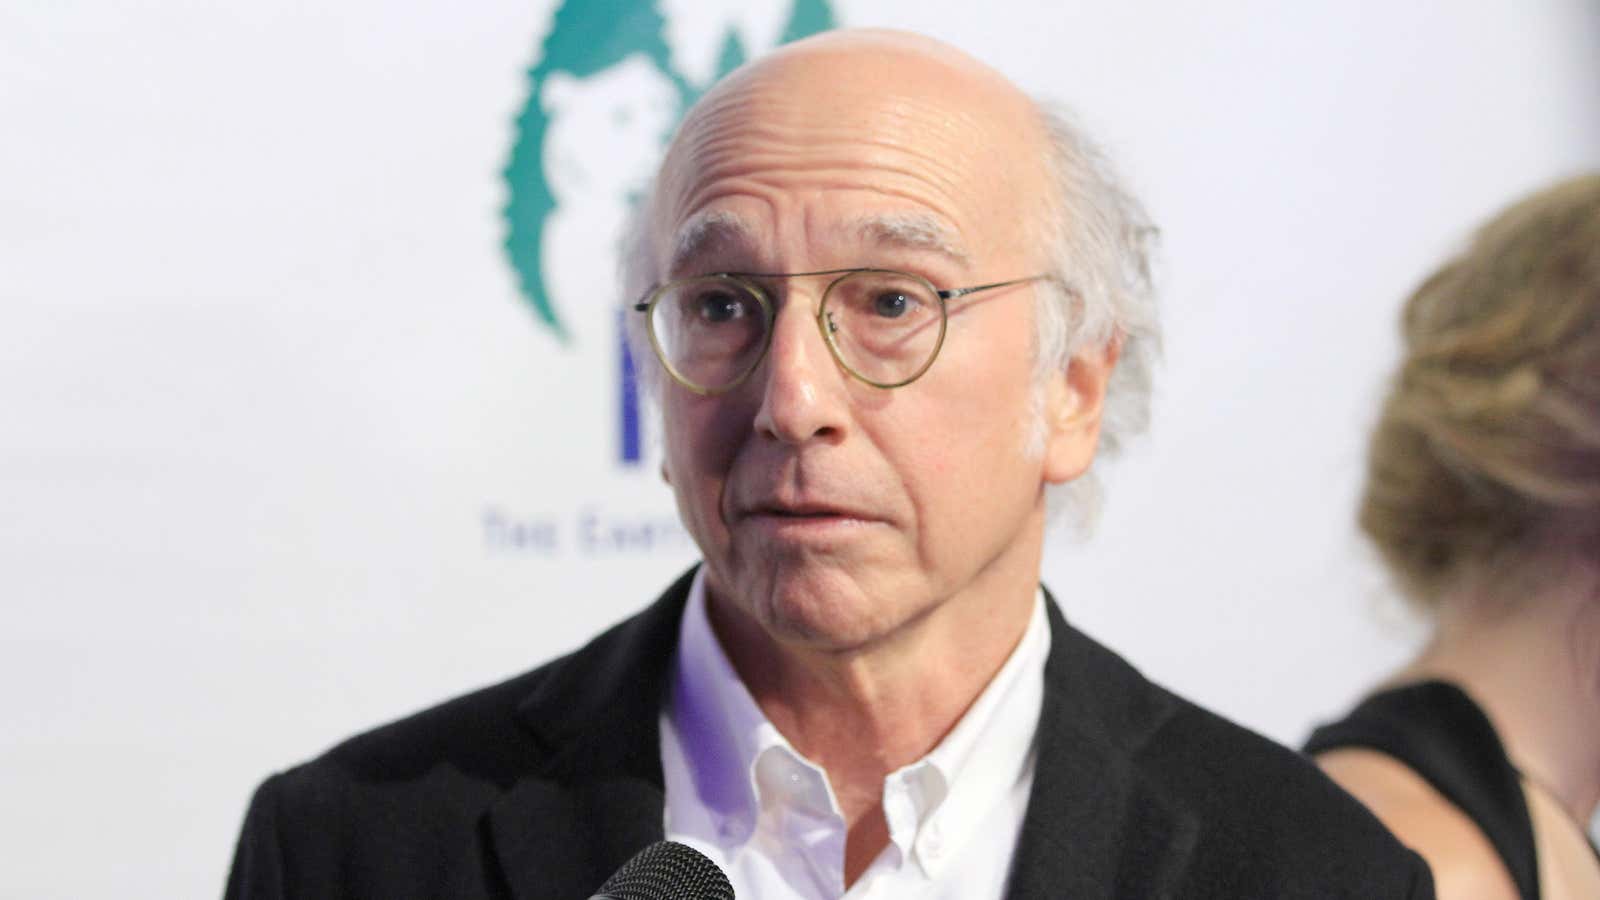 Larry David pays attention to the micro-choices.